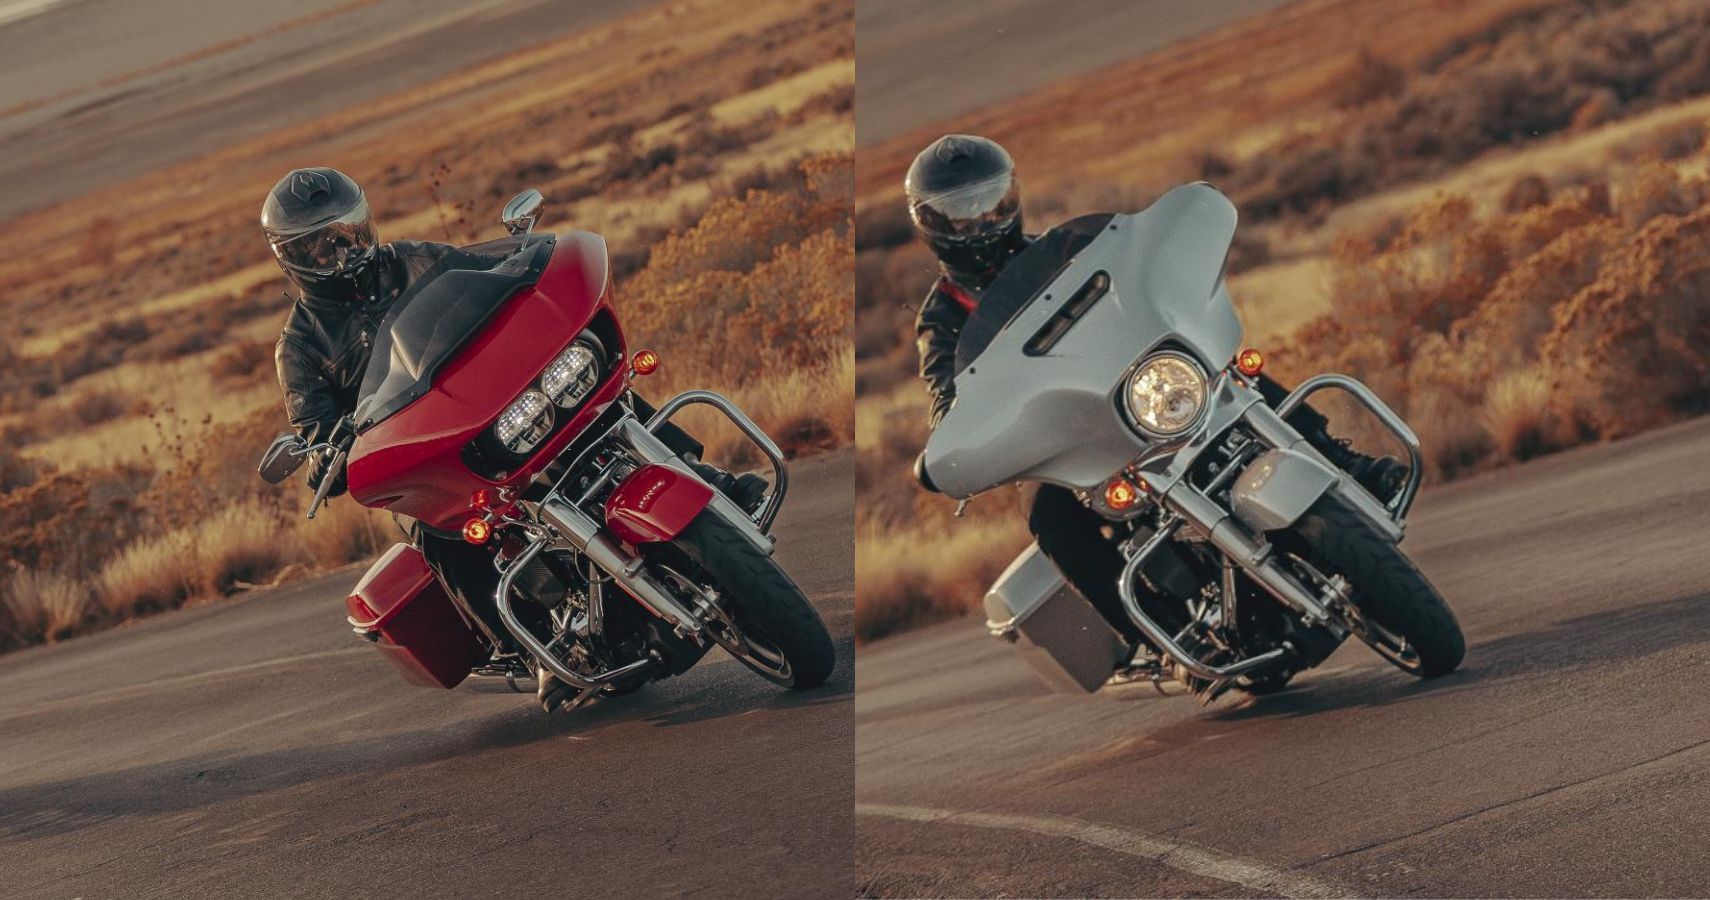 Harley-Davidson Road Glide Vs Street Glide: Here's Which One Is Better For Touring